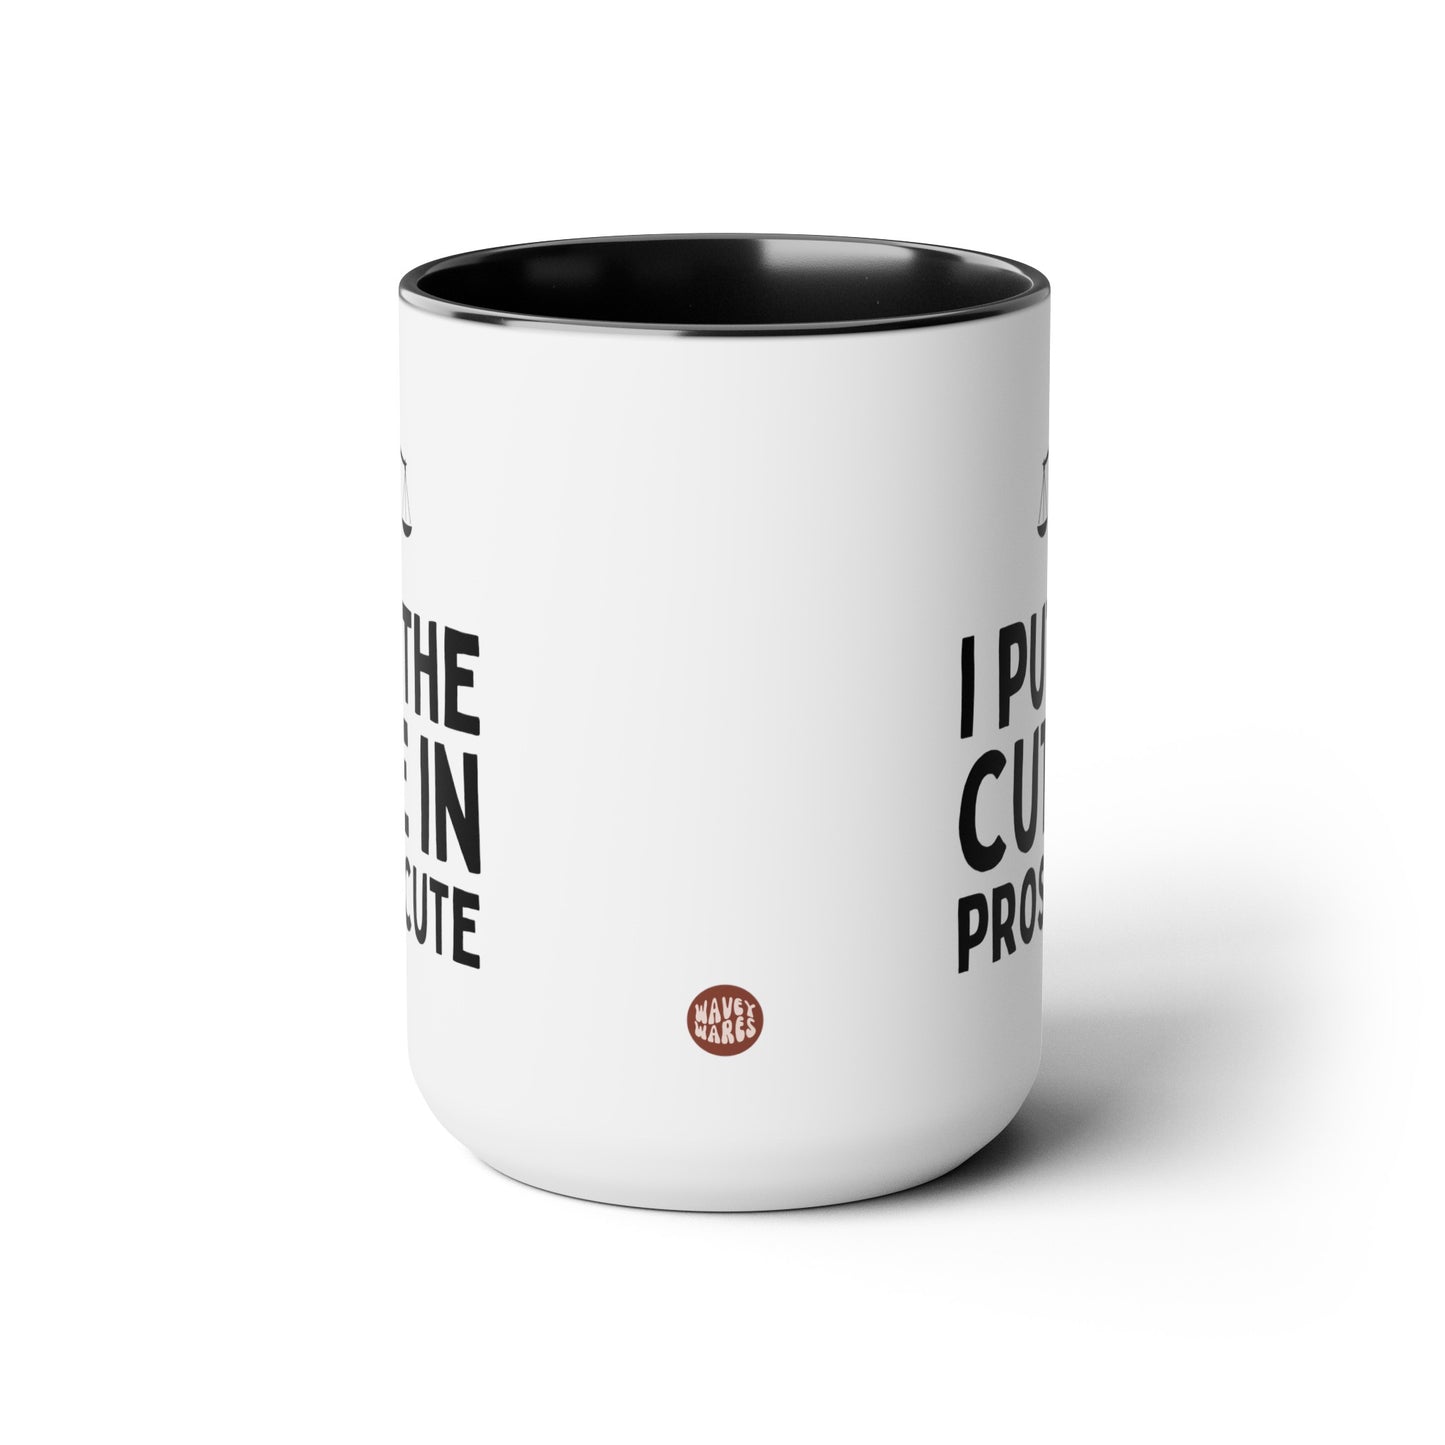 I Put The Cute In Prosecute 15oz white with black accent funny large coffee mug gift for lawyer law school graduation student legal prosecutor girlfriend boyfriend barrister novelty waveywares wavey wares wavywares wavy wares side